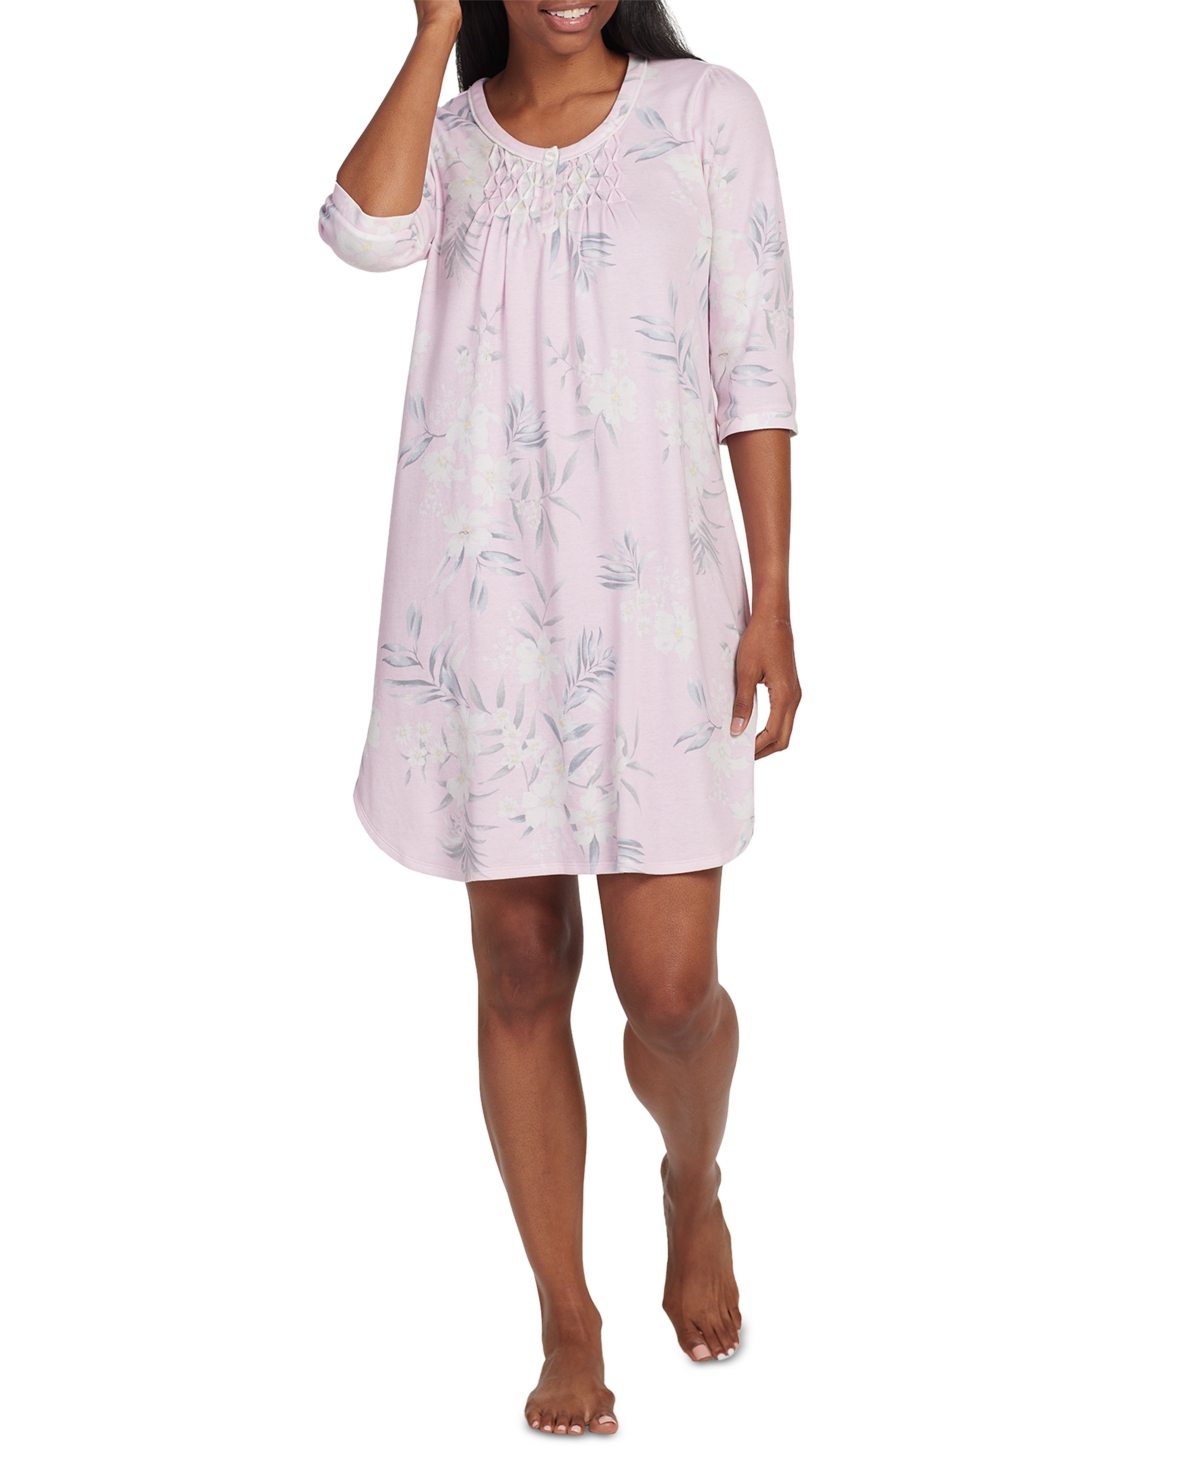 Women's 3/4-Sleeve Floral Nightgown - Pink Bouquets